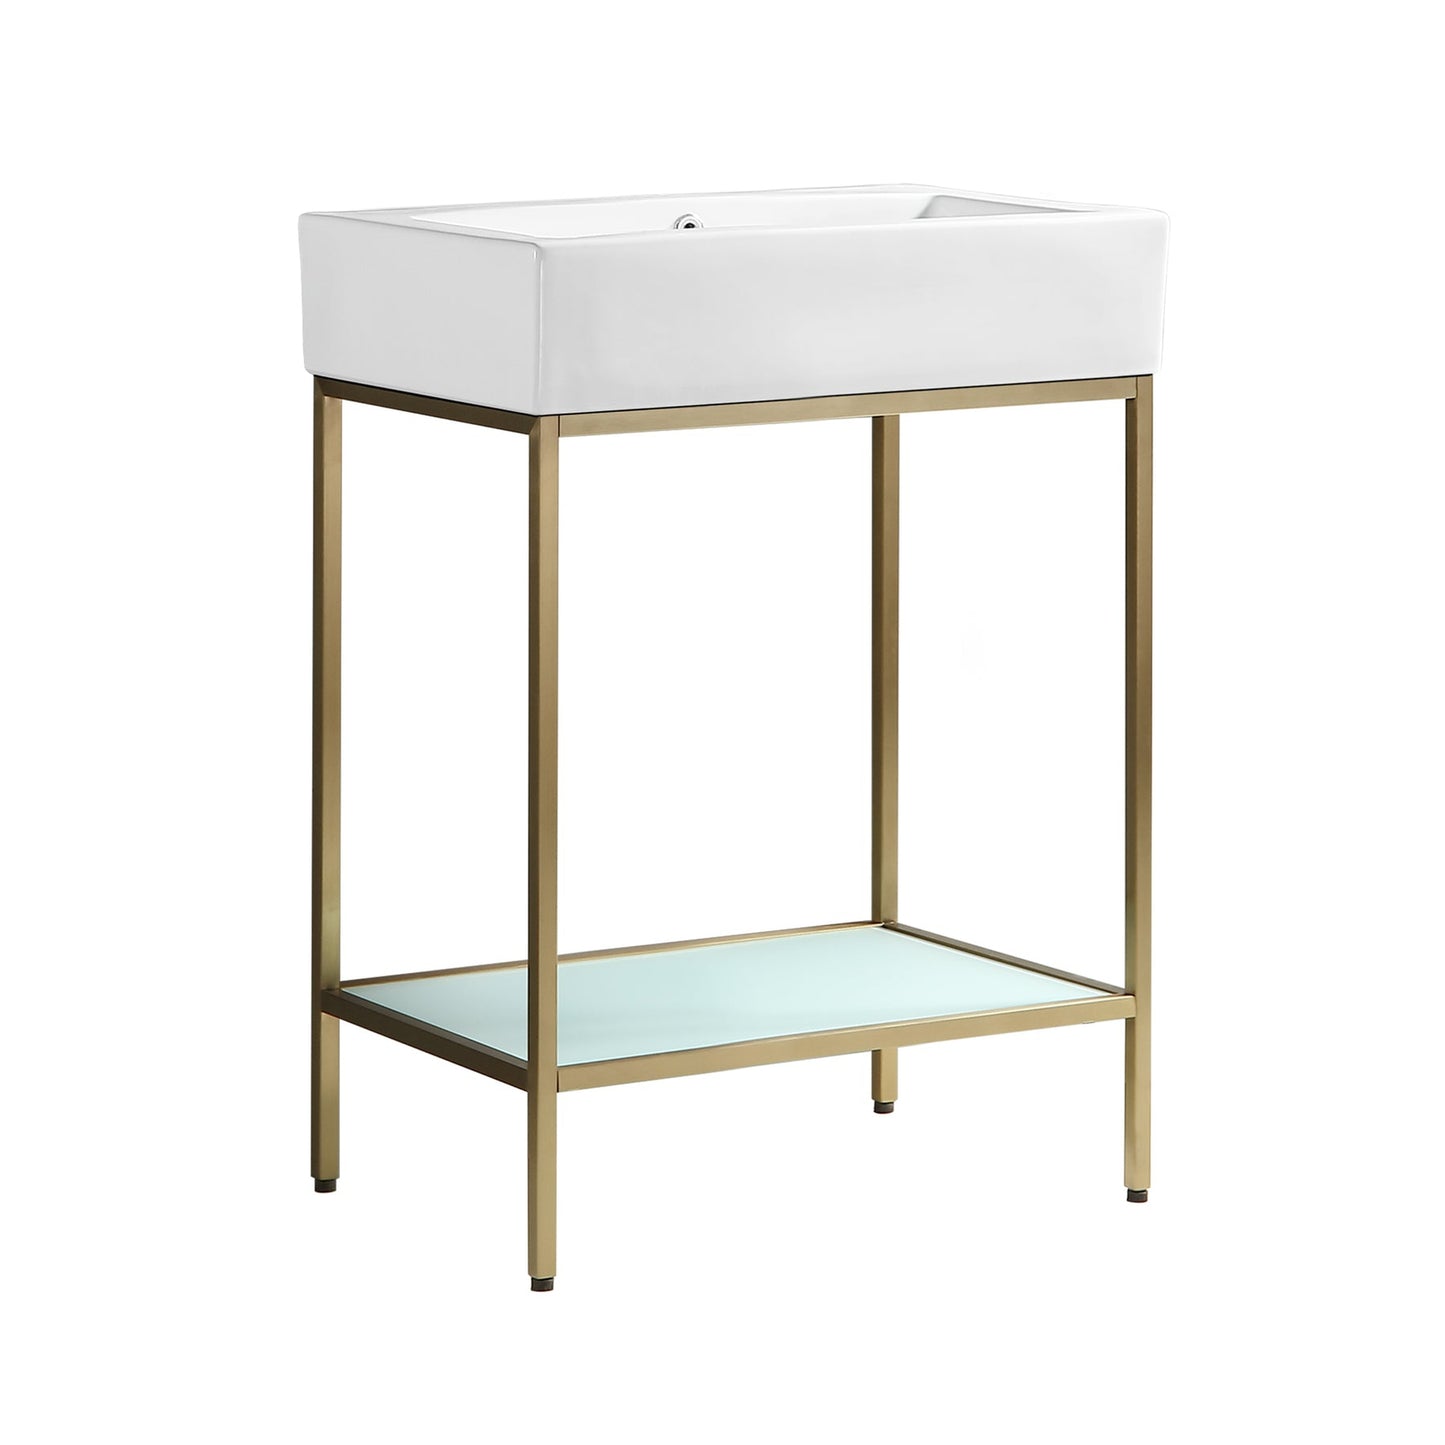 Swiss Madison Pierre 24" x 34" Freestanding White Bathroom Vanity With Ceramic Single Sink and Gold Metal Frame